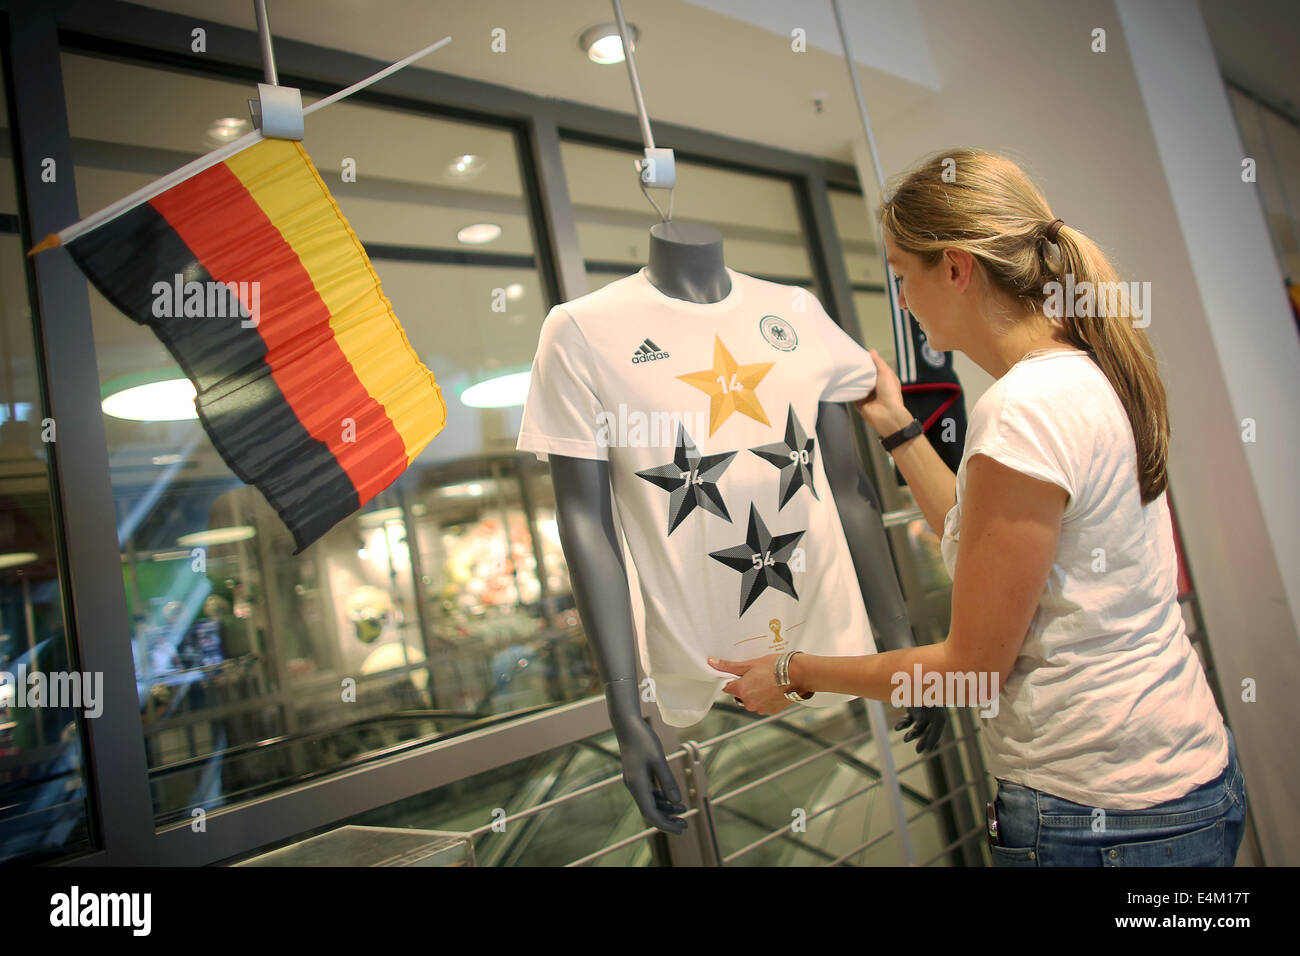 Frankfurt Main, Germany. 14th July, 2014. The new fan jersey by sports  goods manufacturer adidas is put on display by an employee at department  store 'Galeria Kaufhof' in Frankfurt Main, Germany, 14